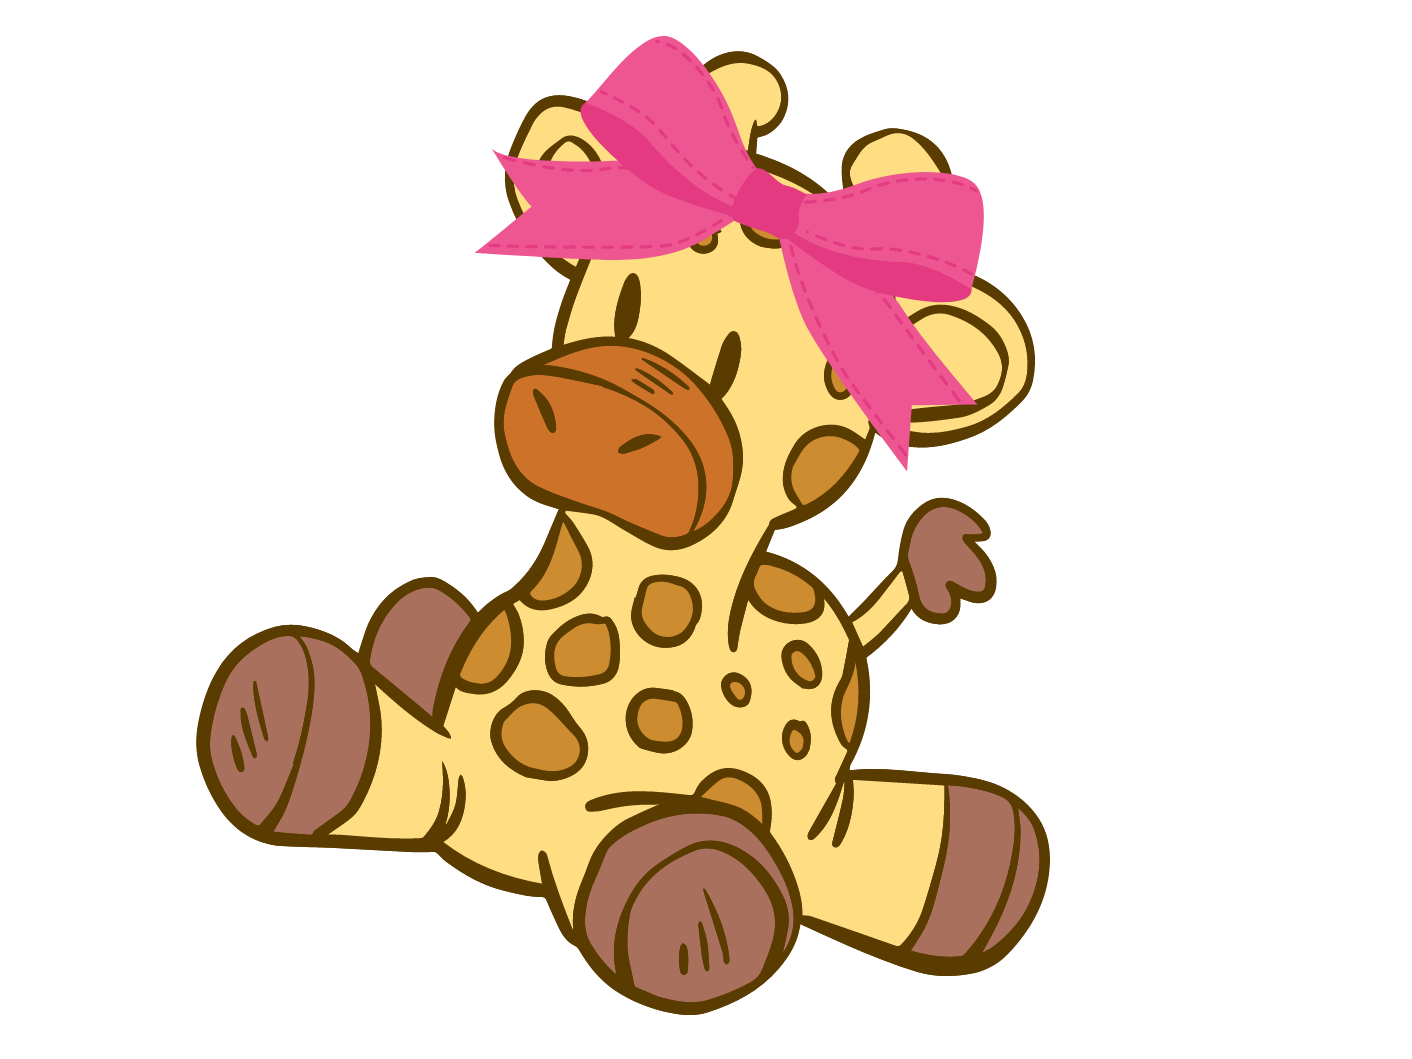 Picture of a stuffed animal giraffe with a pink bow on its head.